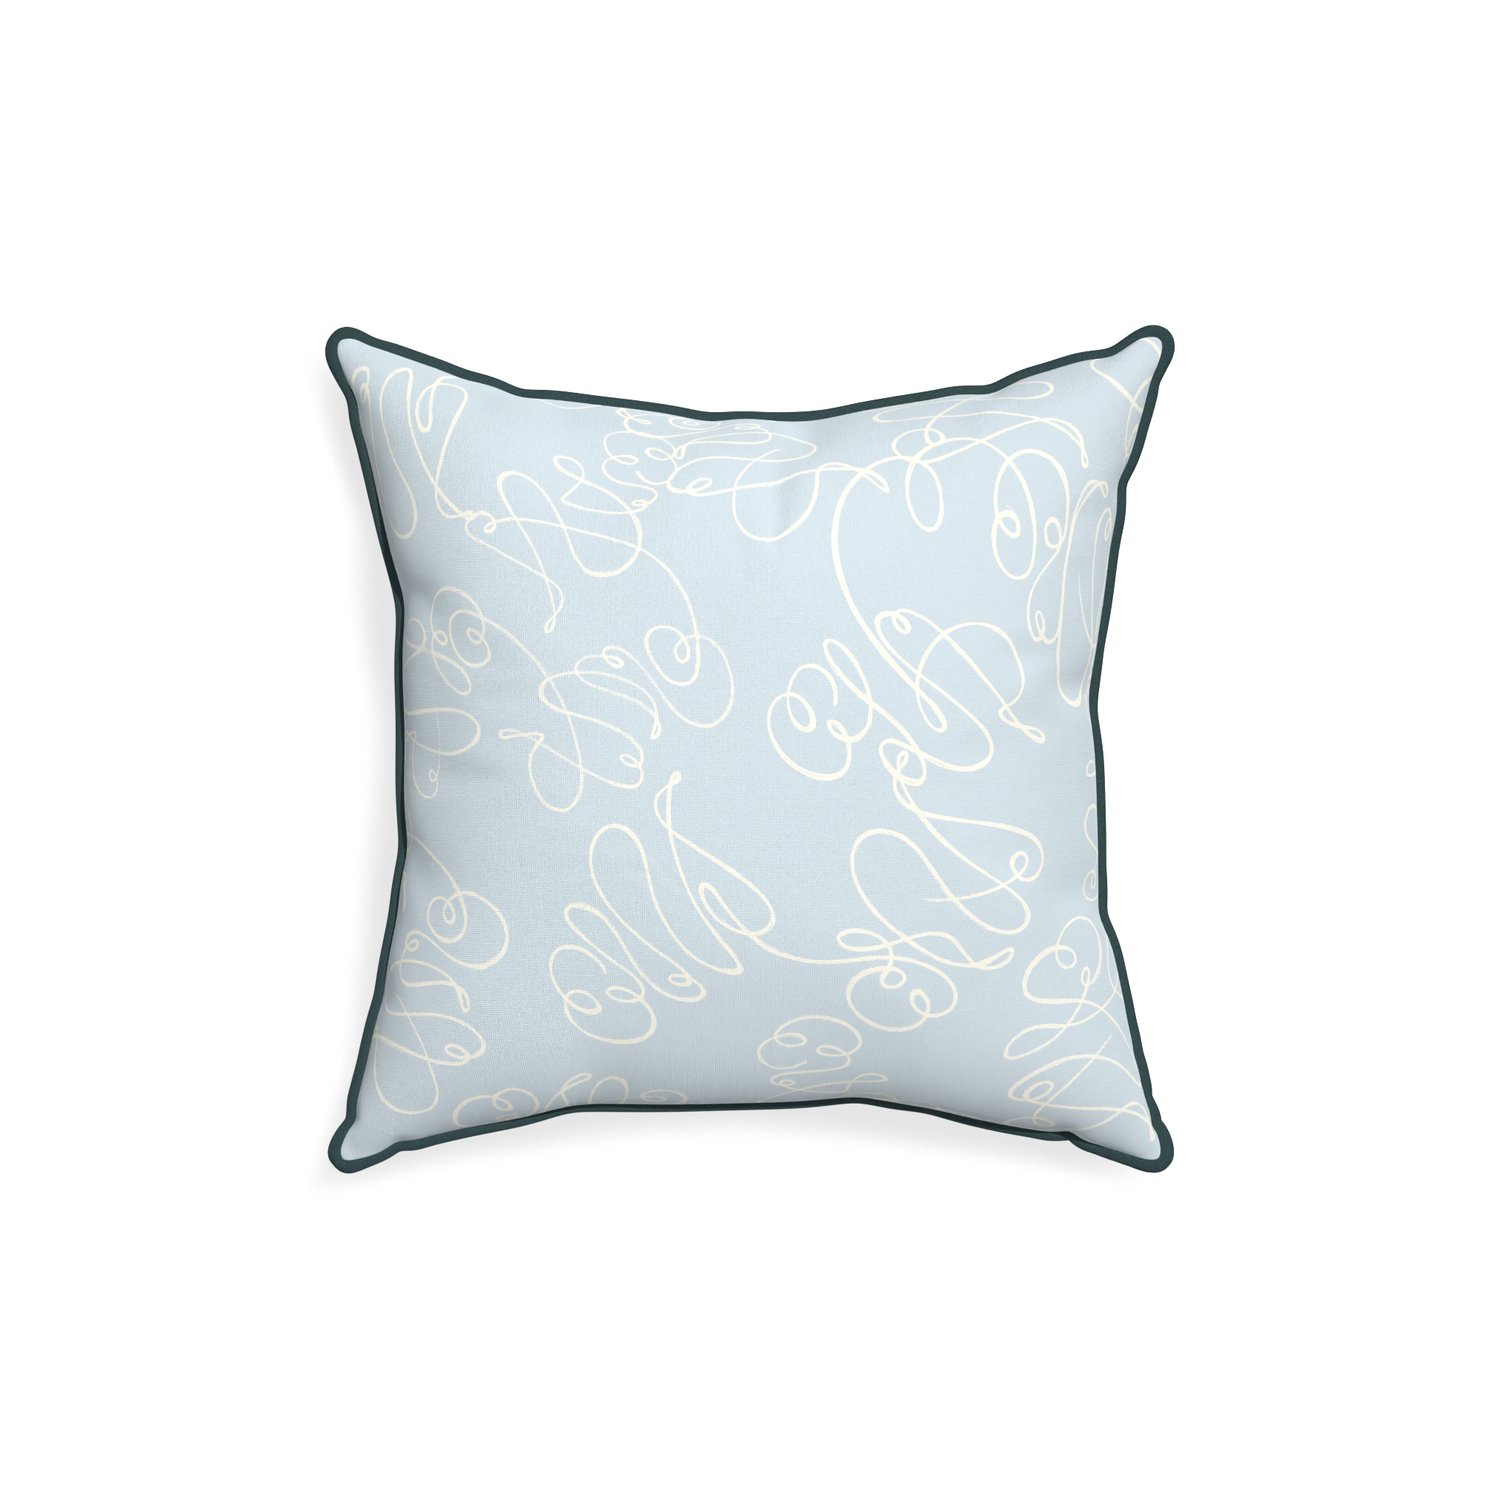 18-square mirabella custom powder blue abstractpillow with p piping on white background